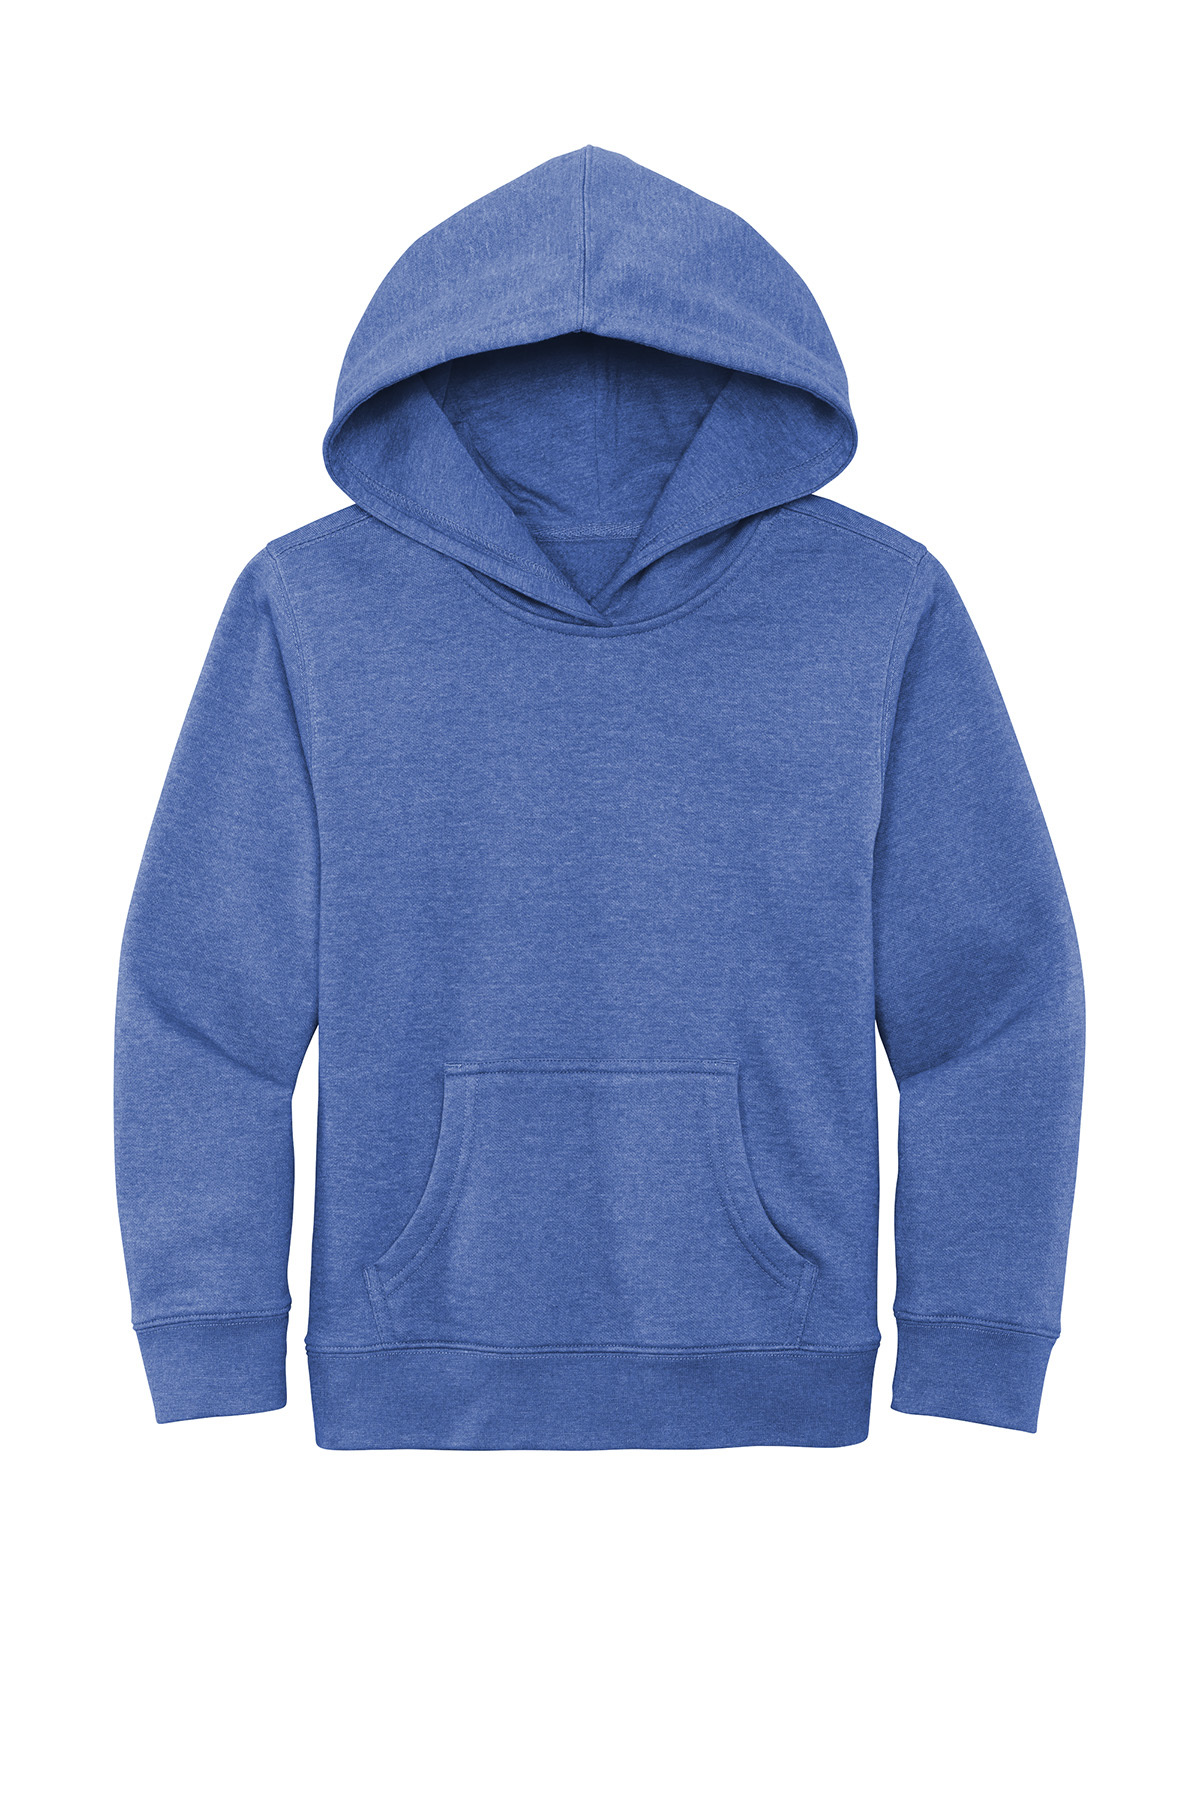 District Youth V.I.T. Fleece Hoodie | Product | SanMar